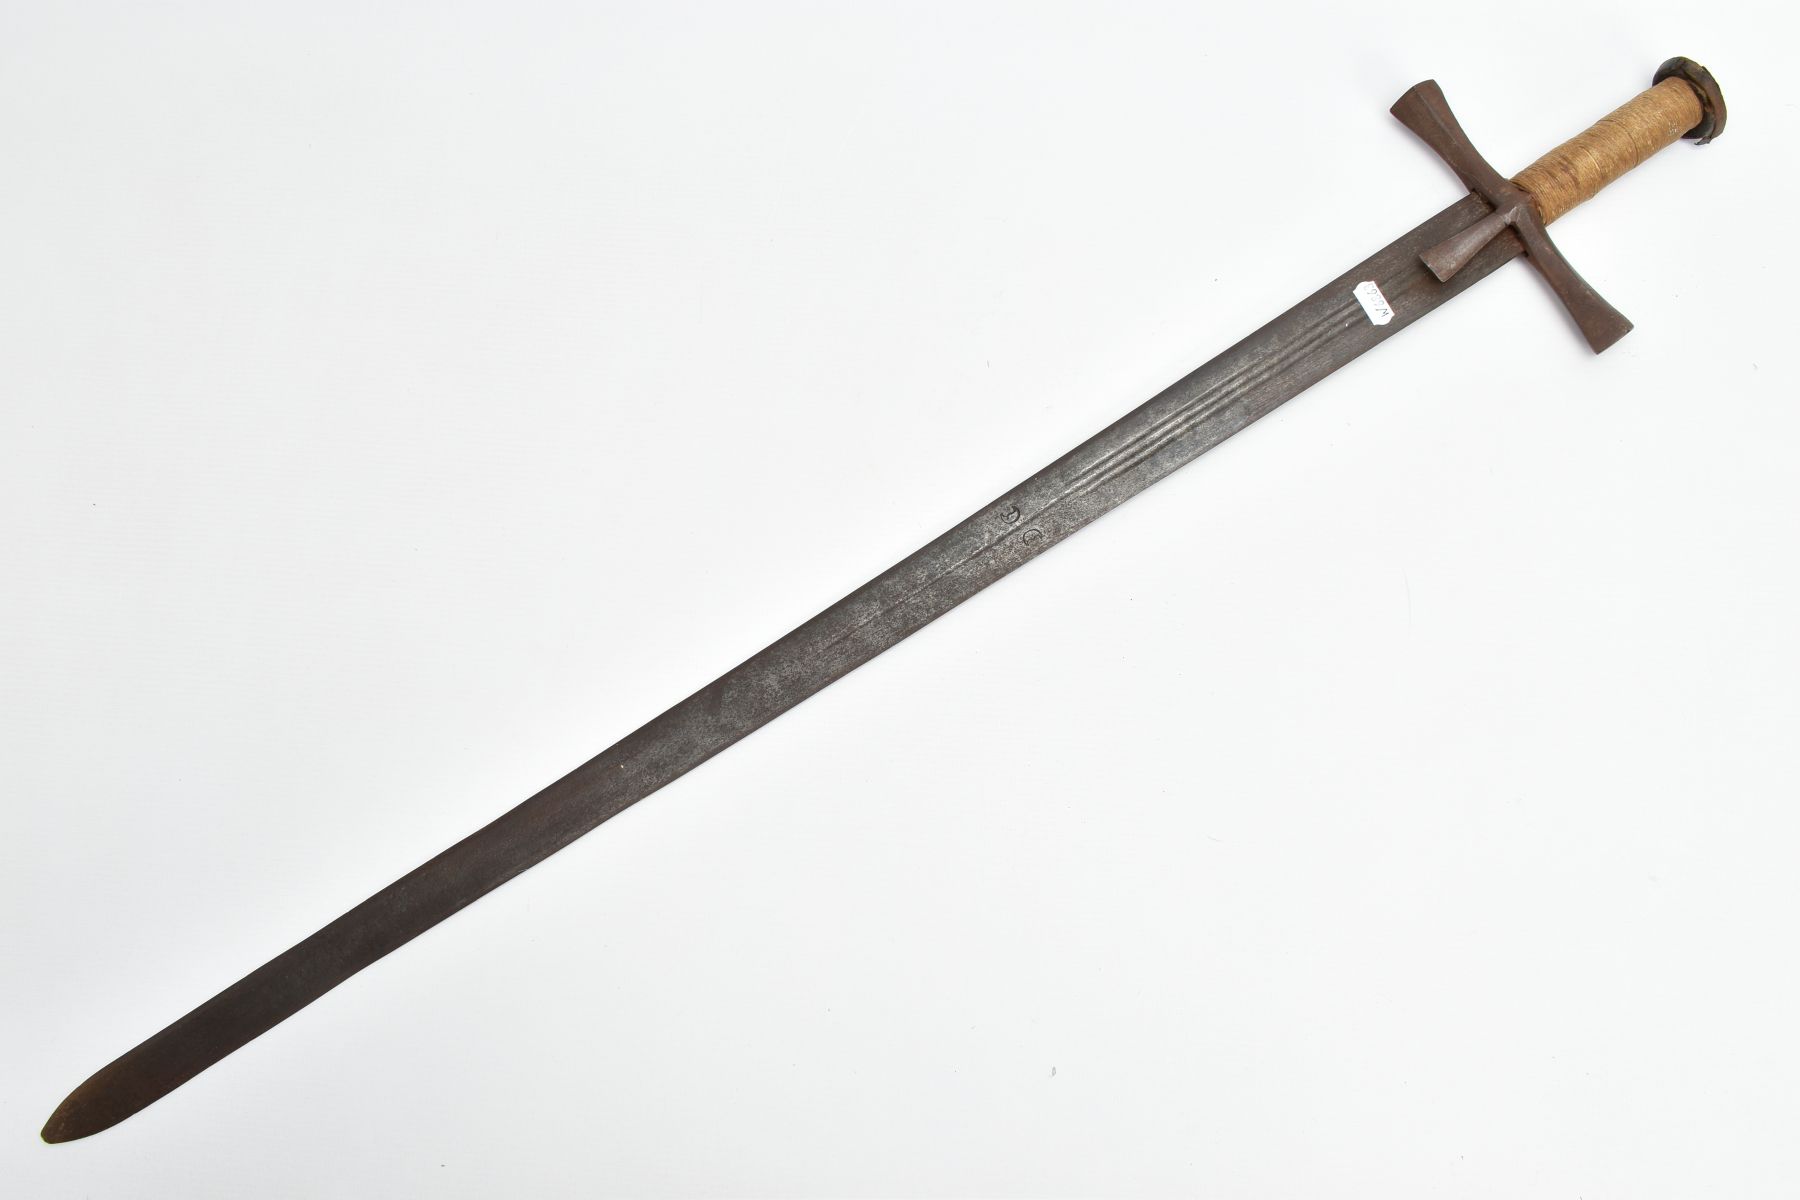 A MEDIEVAL STYLE SWORD, POSSIBLY EUROPEAN IN MANUFACTURE IN THE KASKARAS STYLE, the blade is - Image 10 of 13